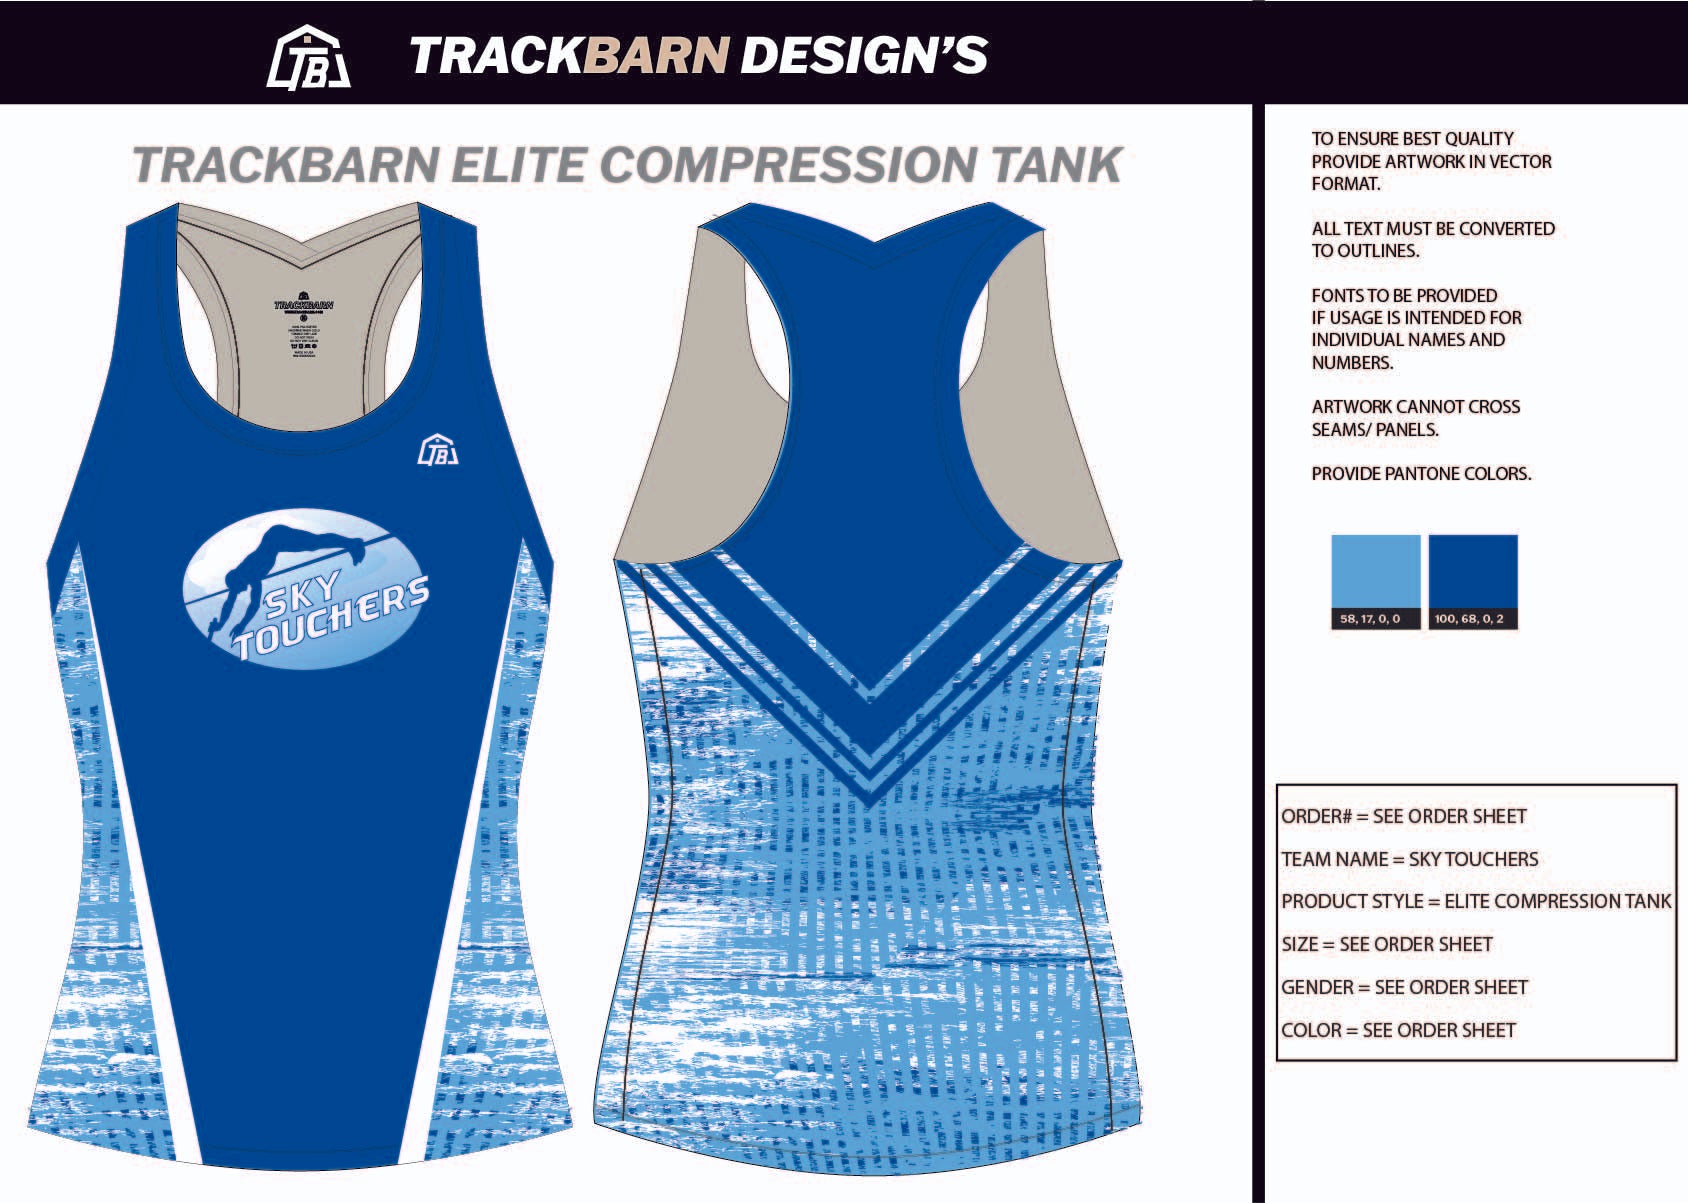 Sky-Touchers- Womens Compression Tank